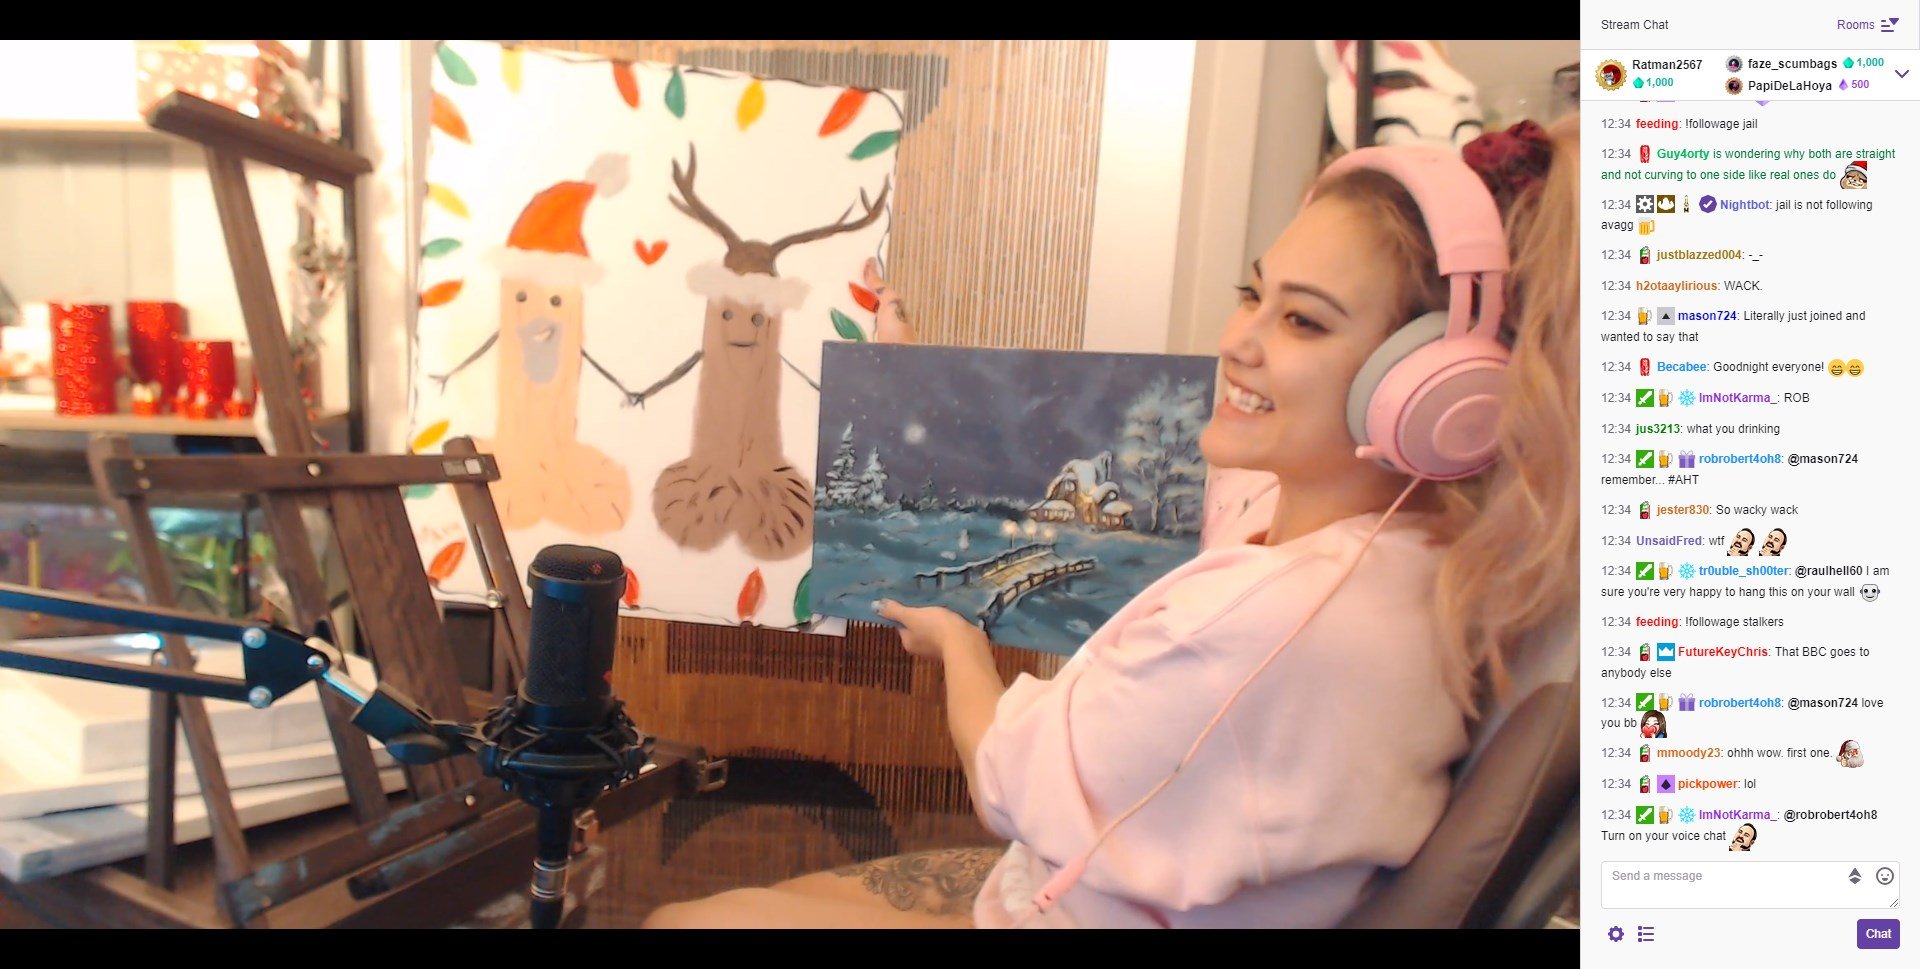 “Tonight's masterpieces from @AvaGG's stream!” 